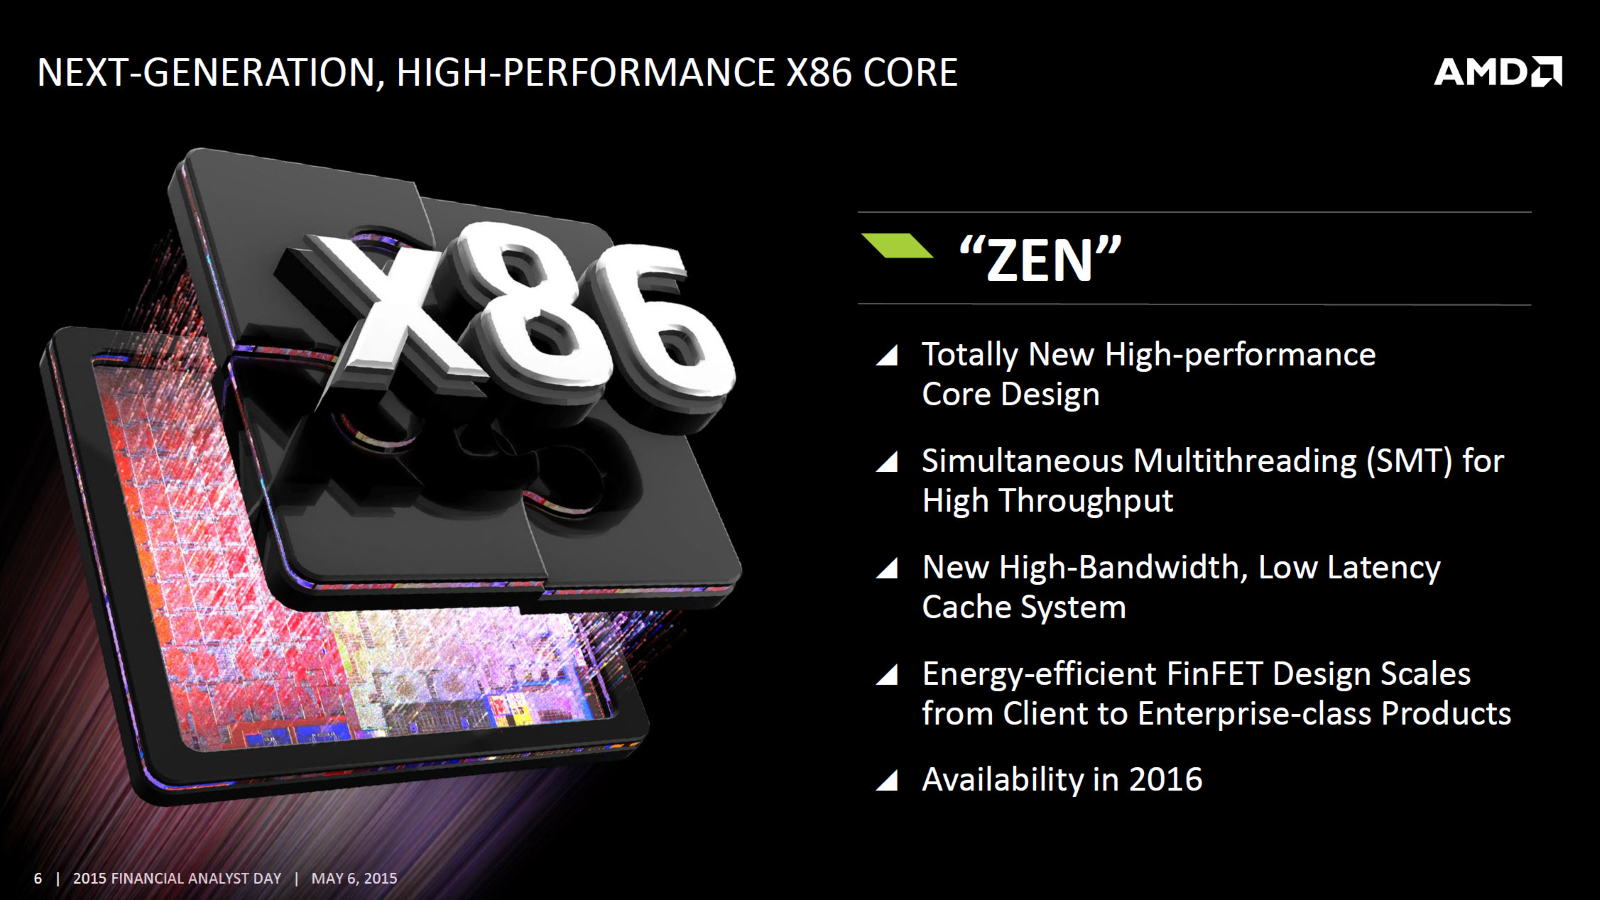 AMD's Zen processors to feature up to 32 cores, 8-channel DDR4